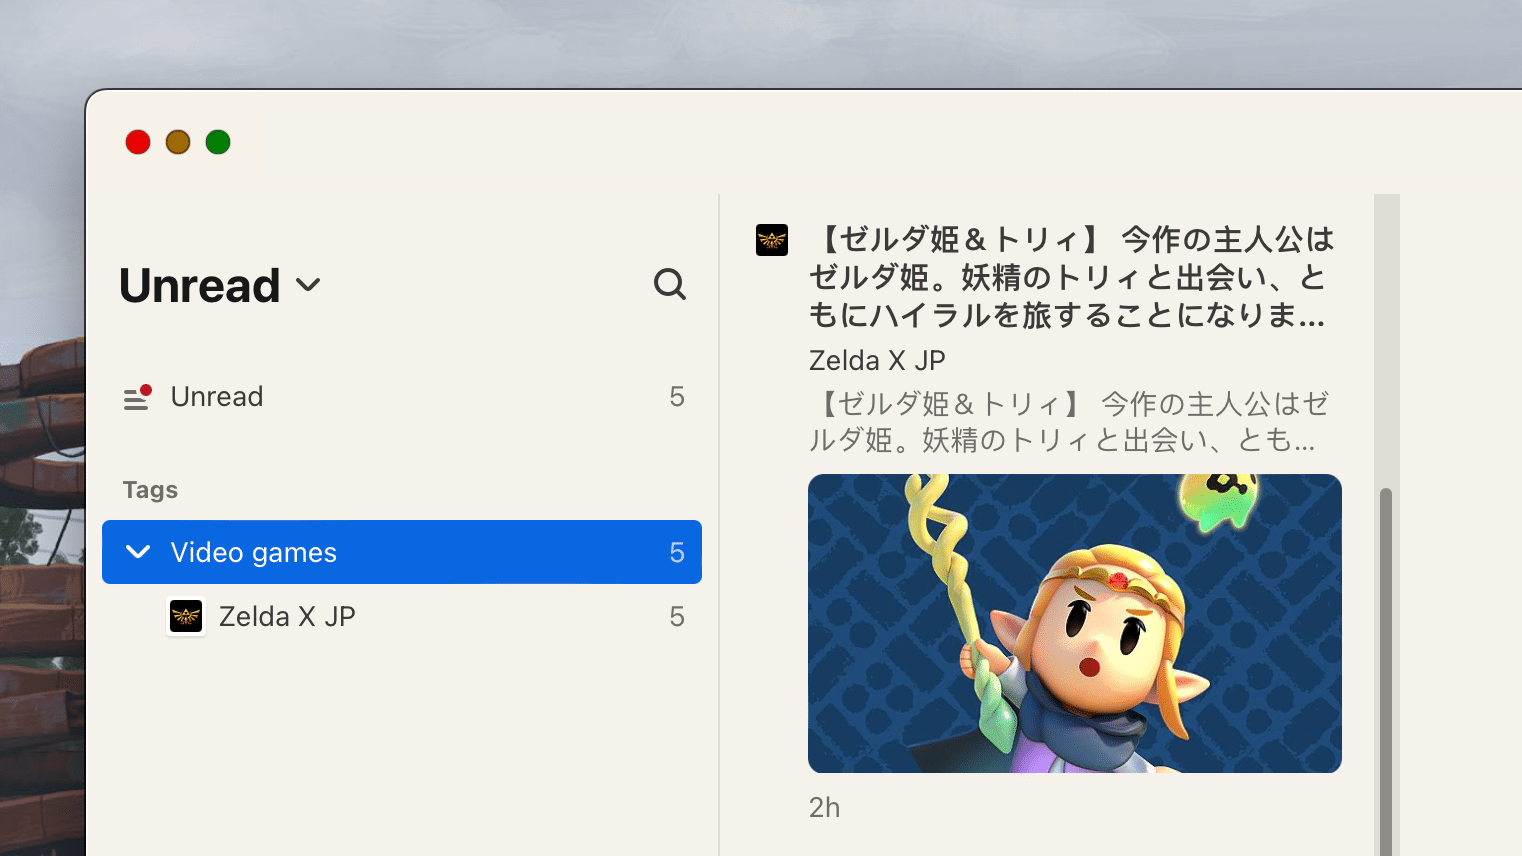 The feed reader Feedbin, with five unread posts in the highlighted video games category. A preview of a post from the Japanese Zelda account is shown, featuring a chibi Zelda holding the mystical Tri Staff.